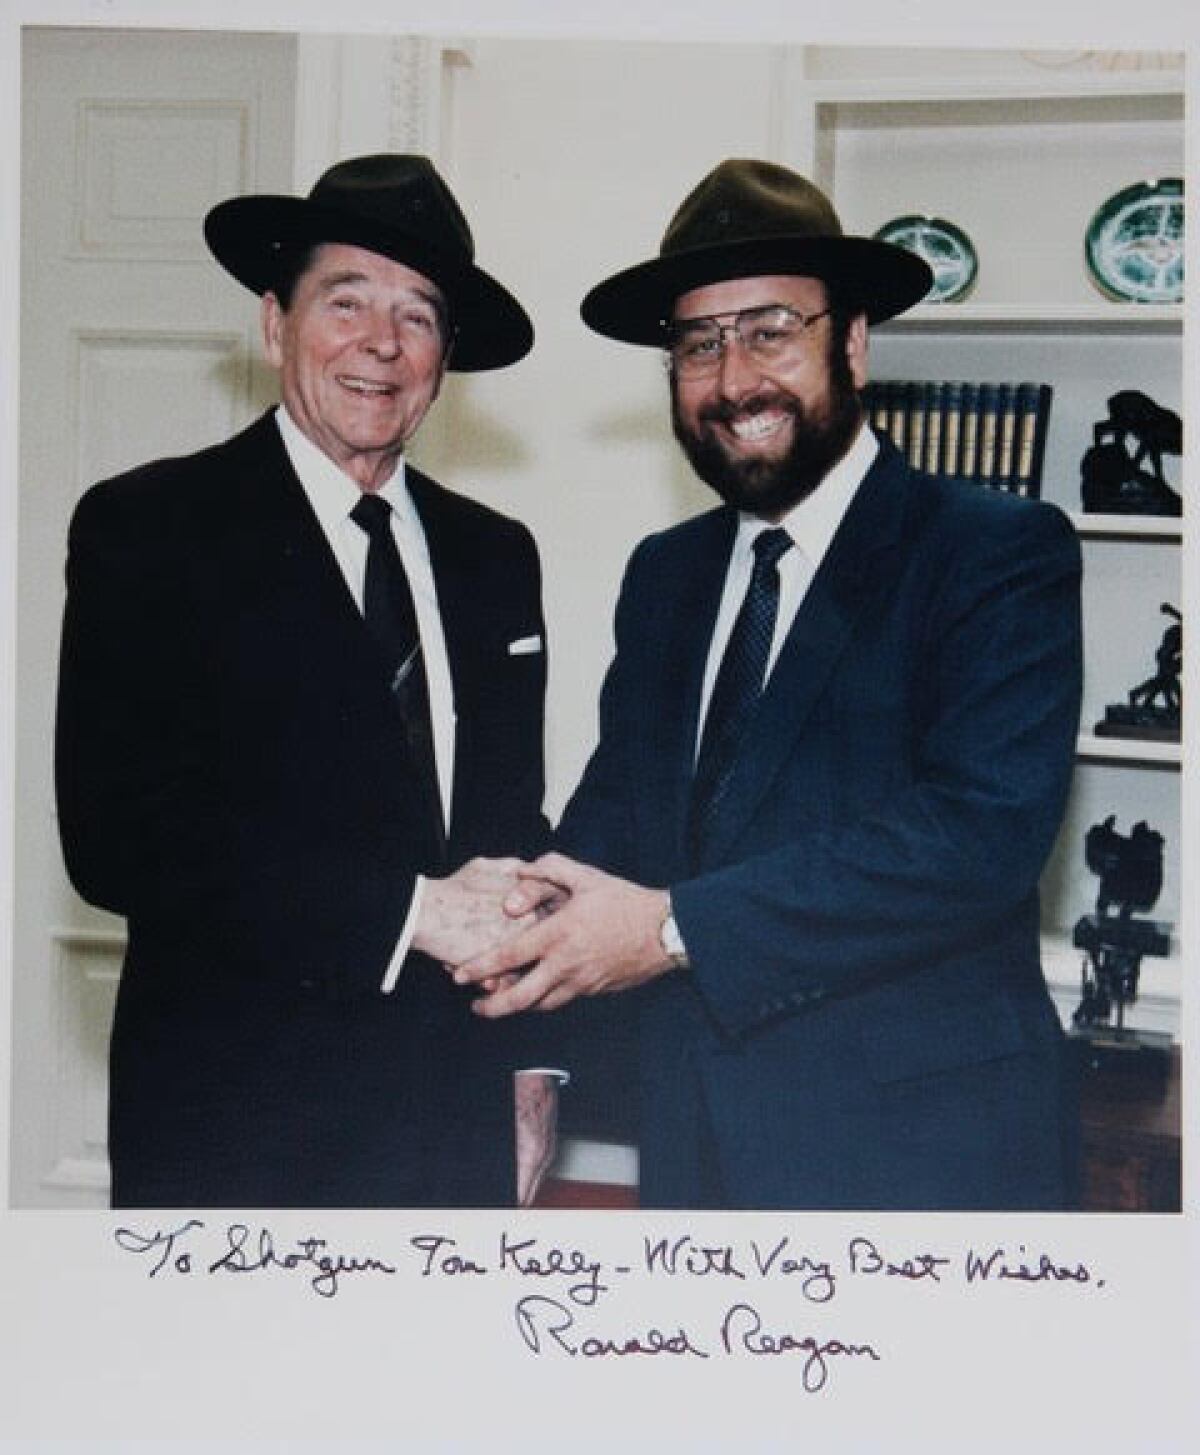 "Shotgun Tom" Kelly visits with President Ronald Reagan in the oval office in the late 1980s